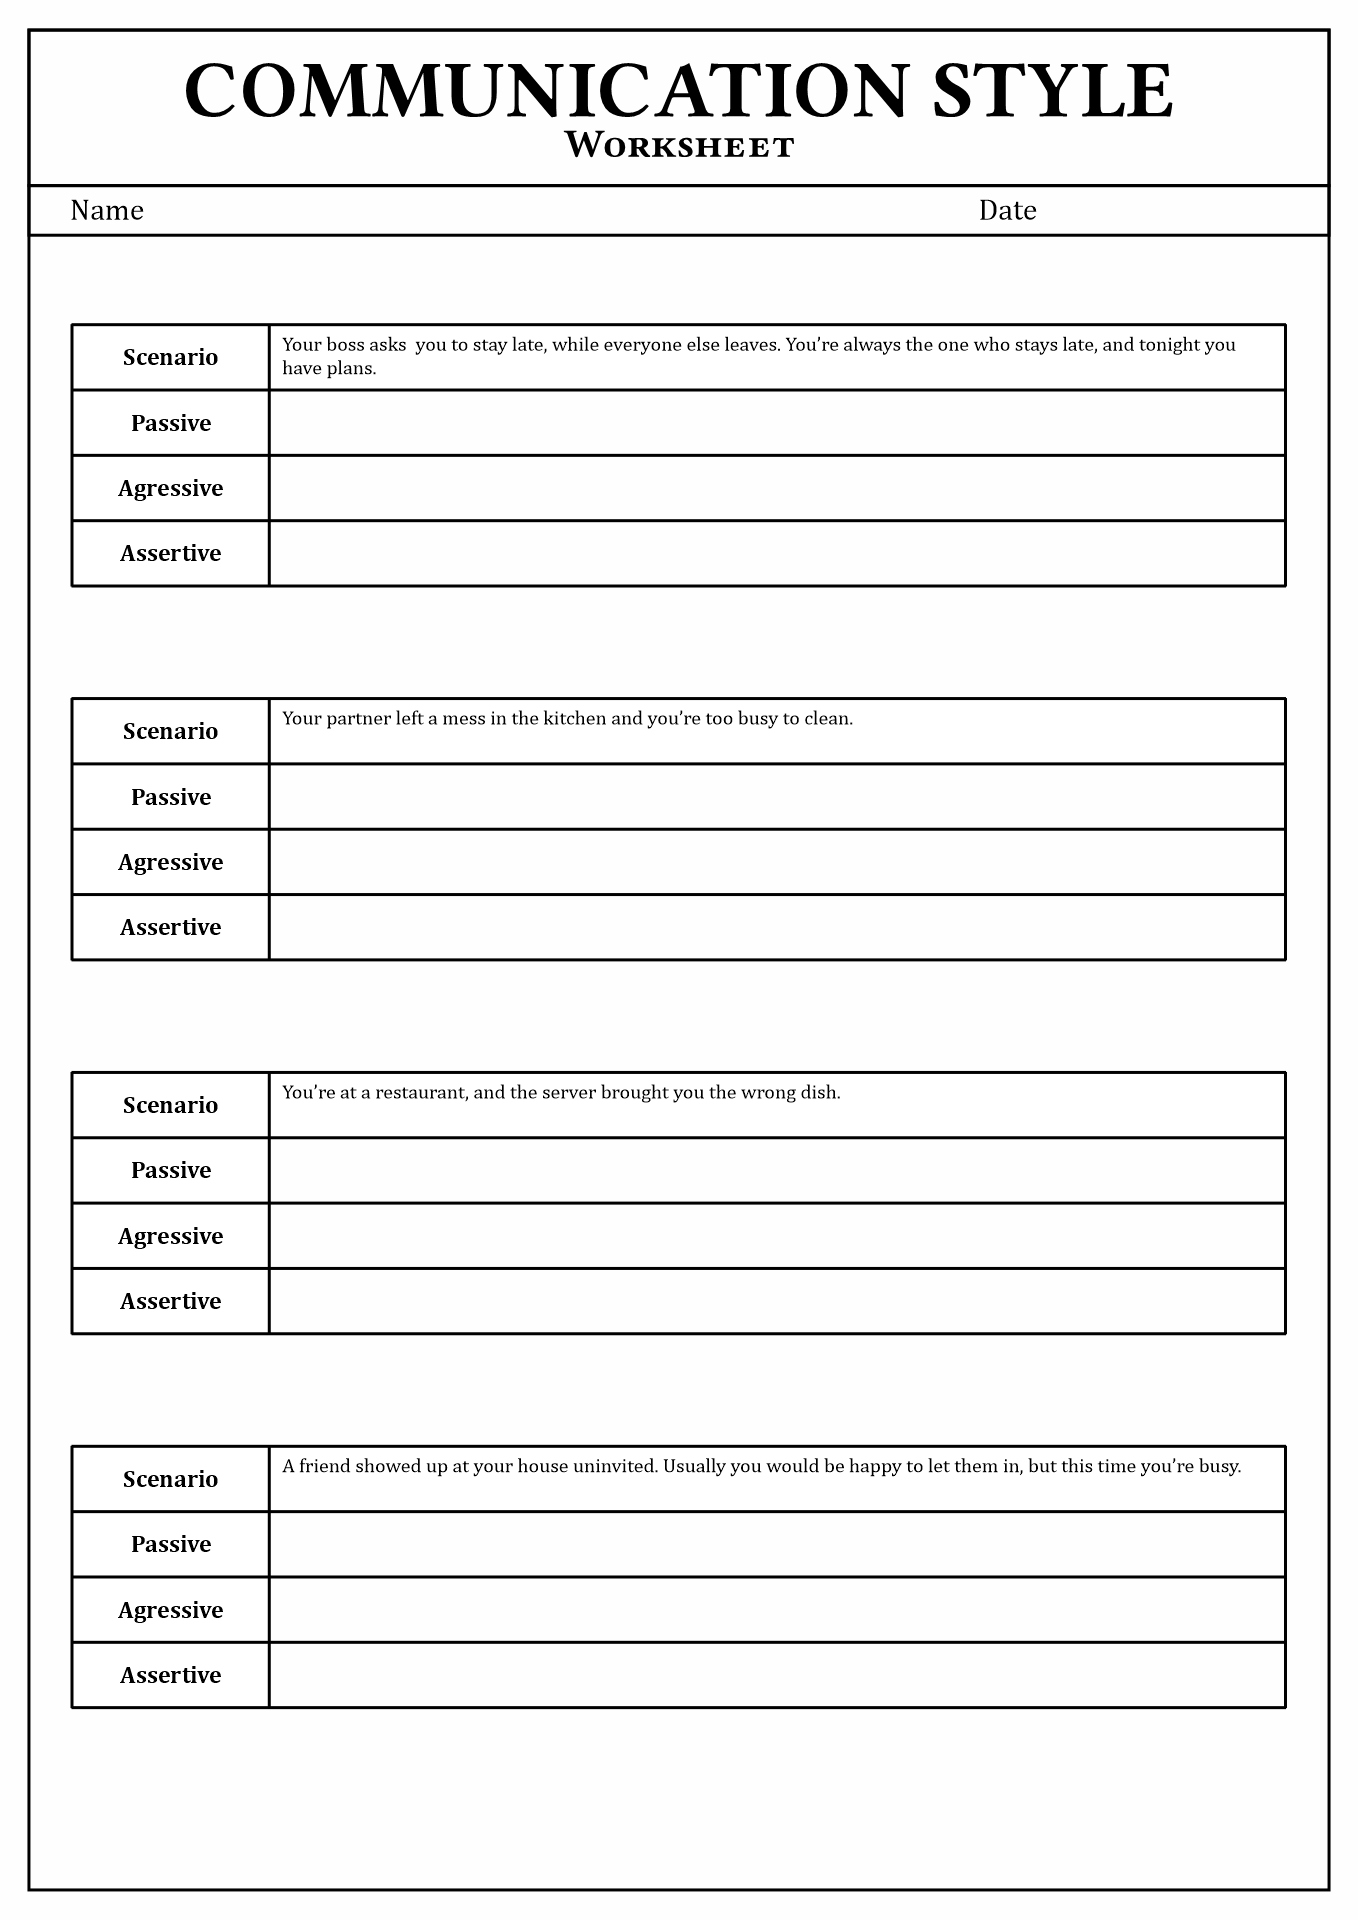 18 Best Images of Personality Styles Assessment Worksheet Personality